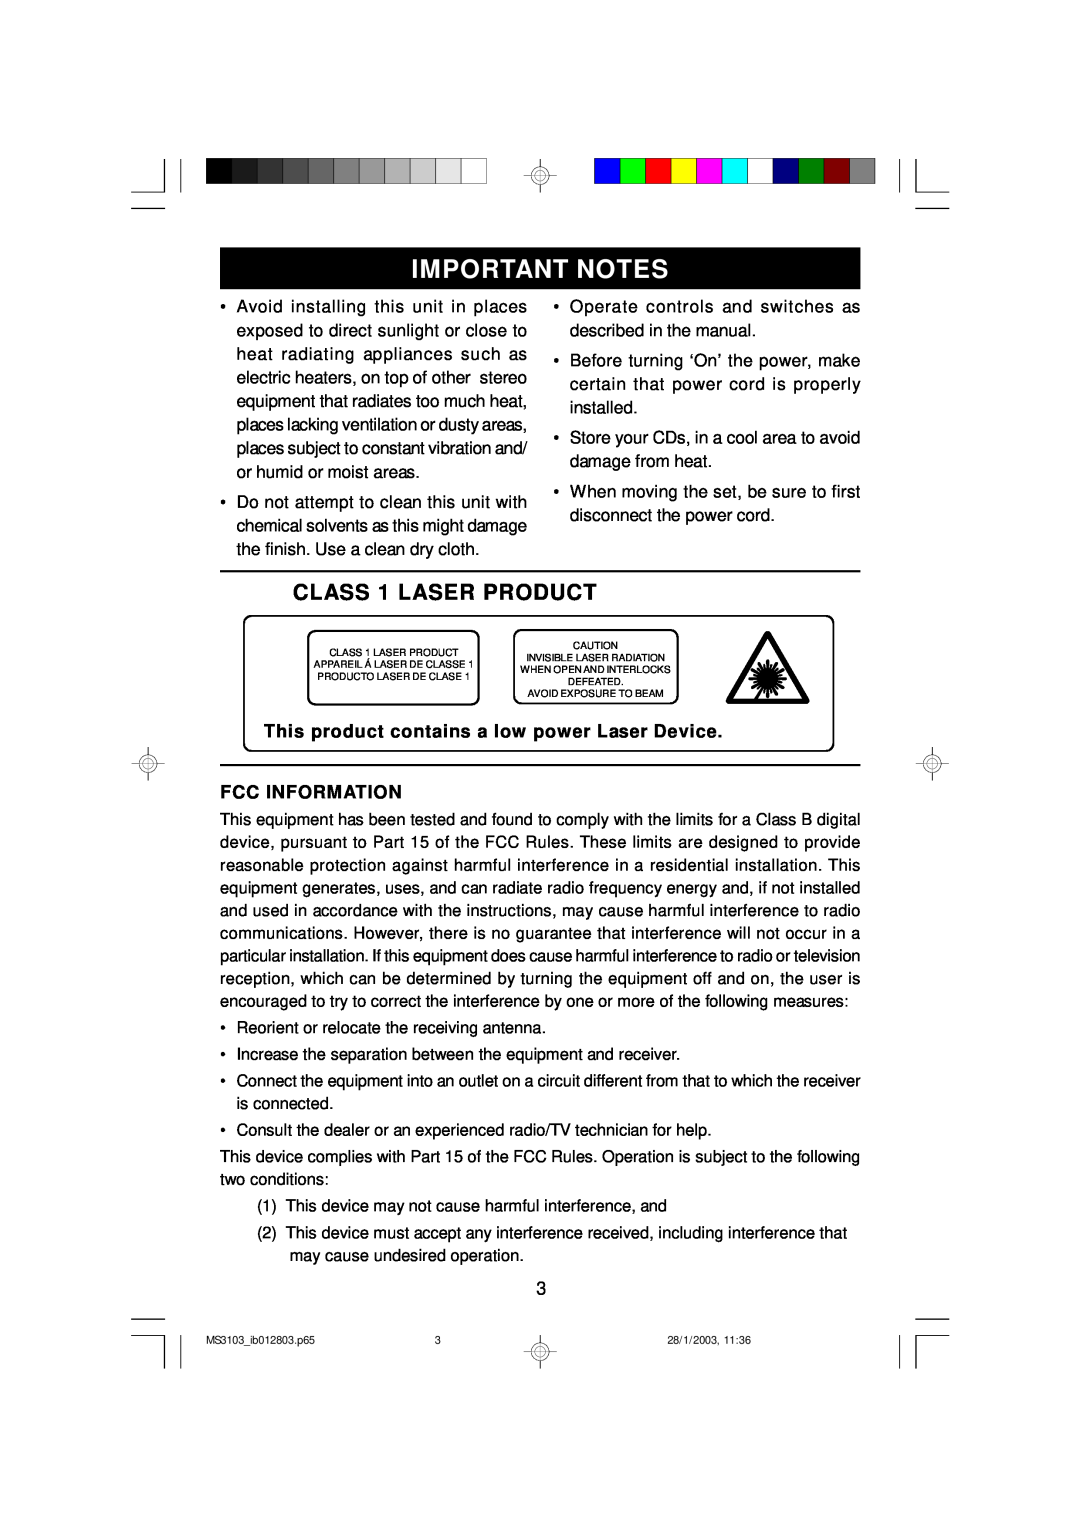 Emerson MS3103 Important Notes, CLASS 1 LASER PRODUCT, This product contains a low power Laser Device, Fcc Information 